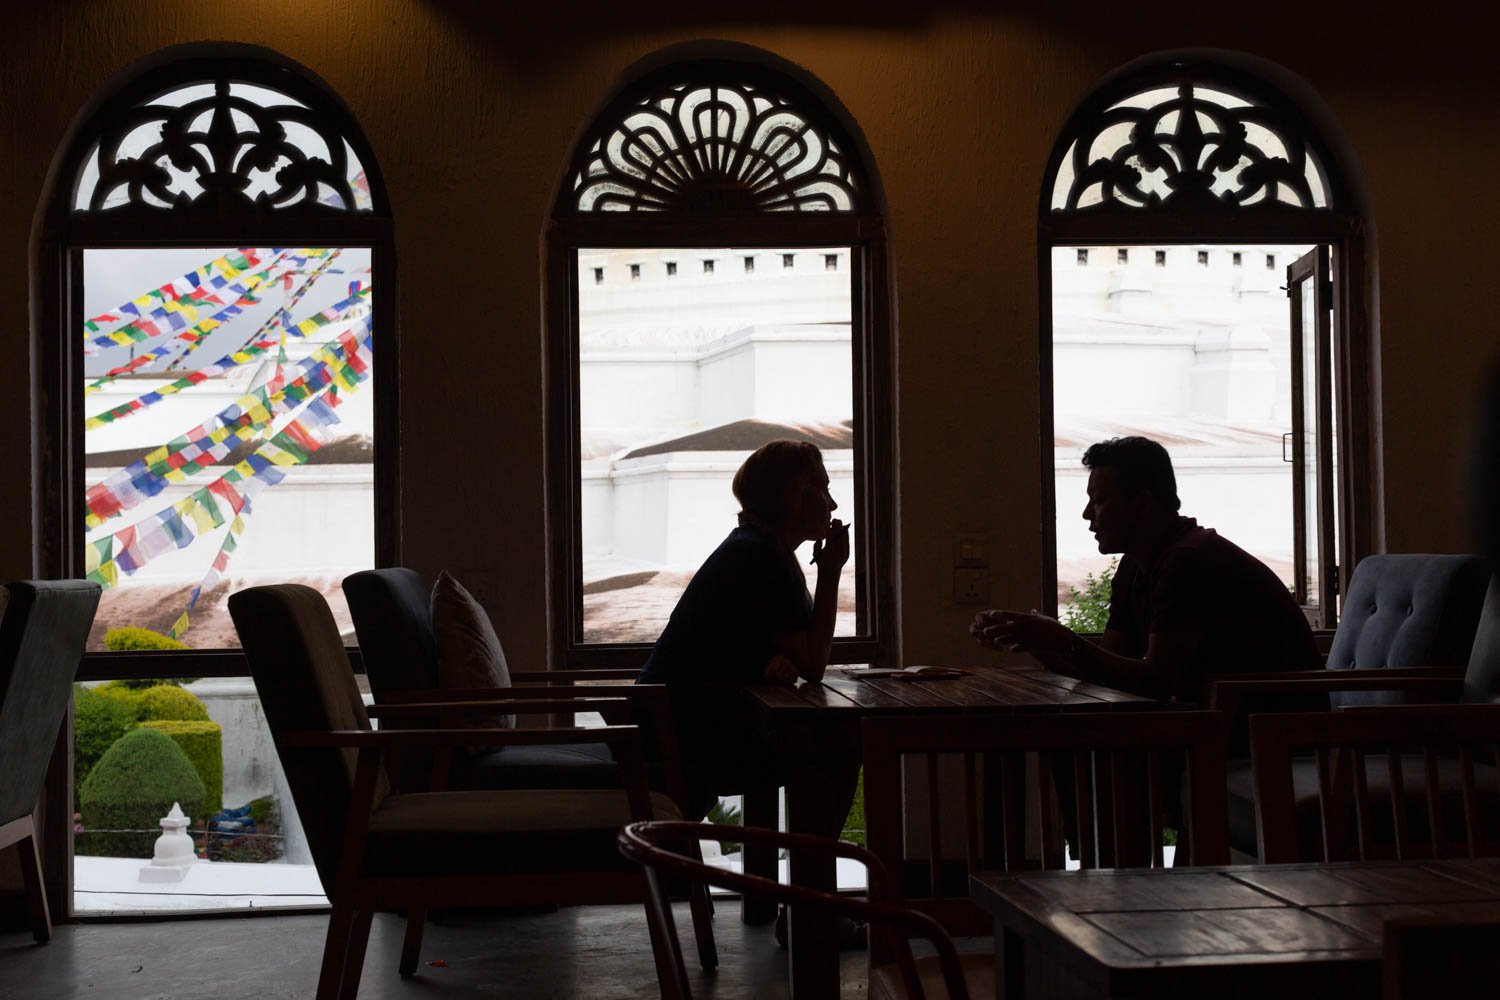  TIME correspondent Aryn Baker interviews an anonymous worker activist at a cafe in Kathmandu, Nepal on June 26, 2022.  The activist worked in Qatar for years before coming back to Nepal. 